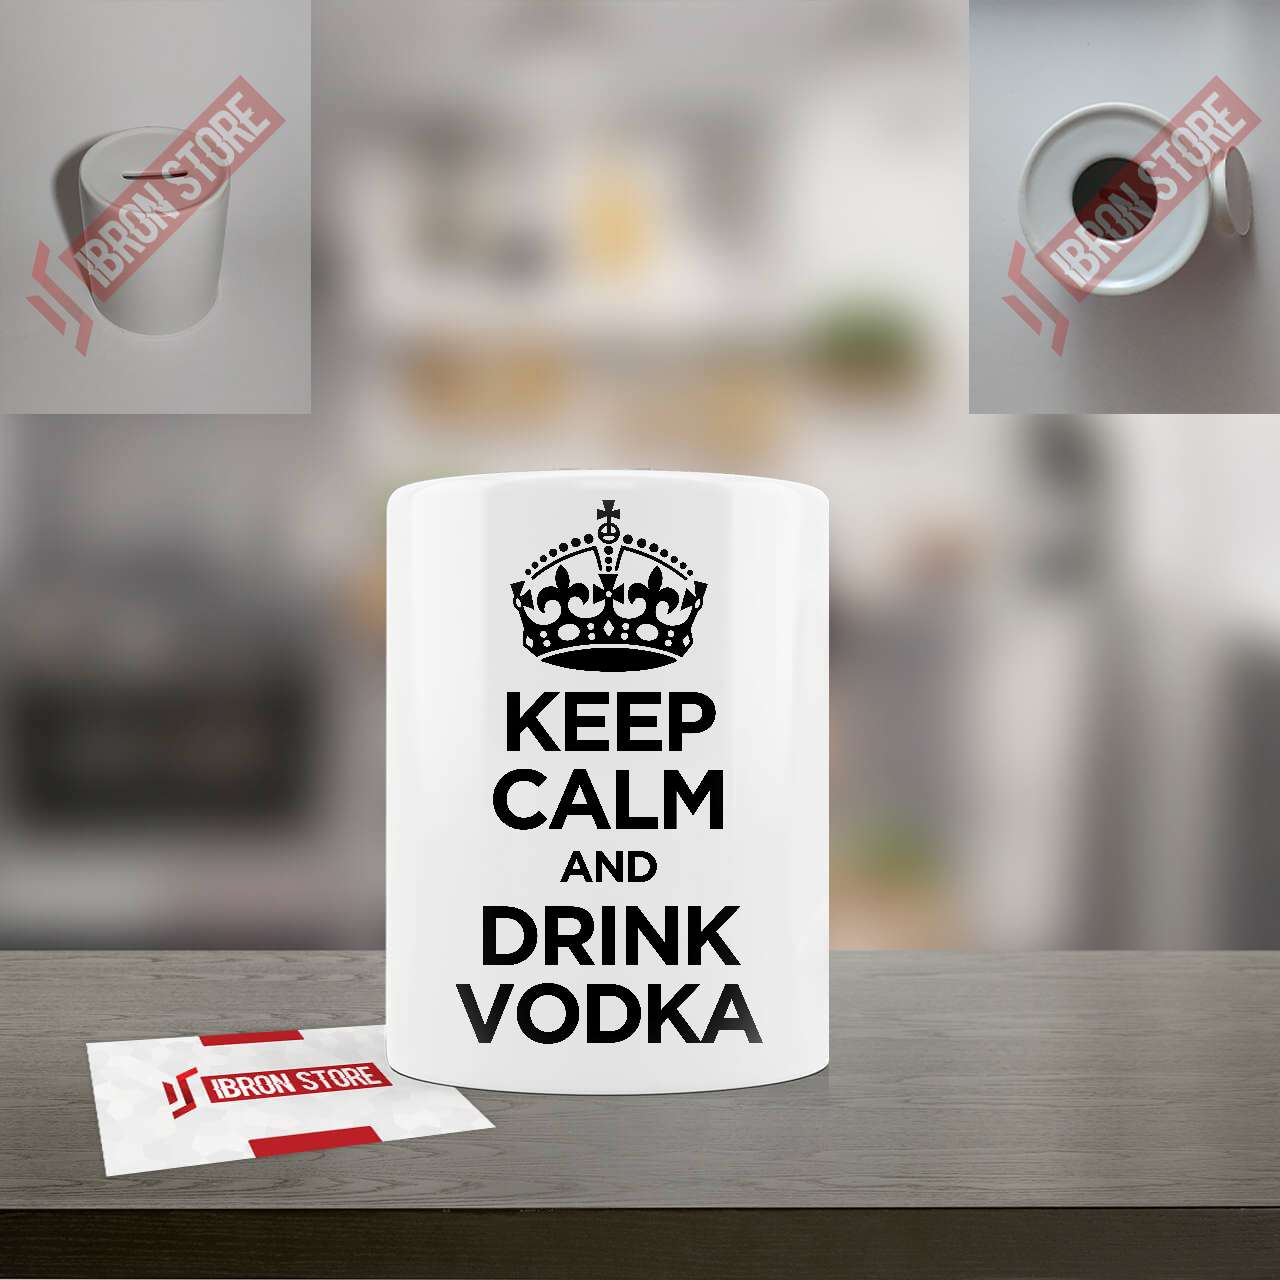 Keep calm and drink vodka mintás persely